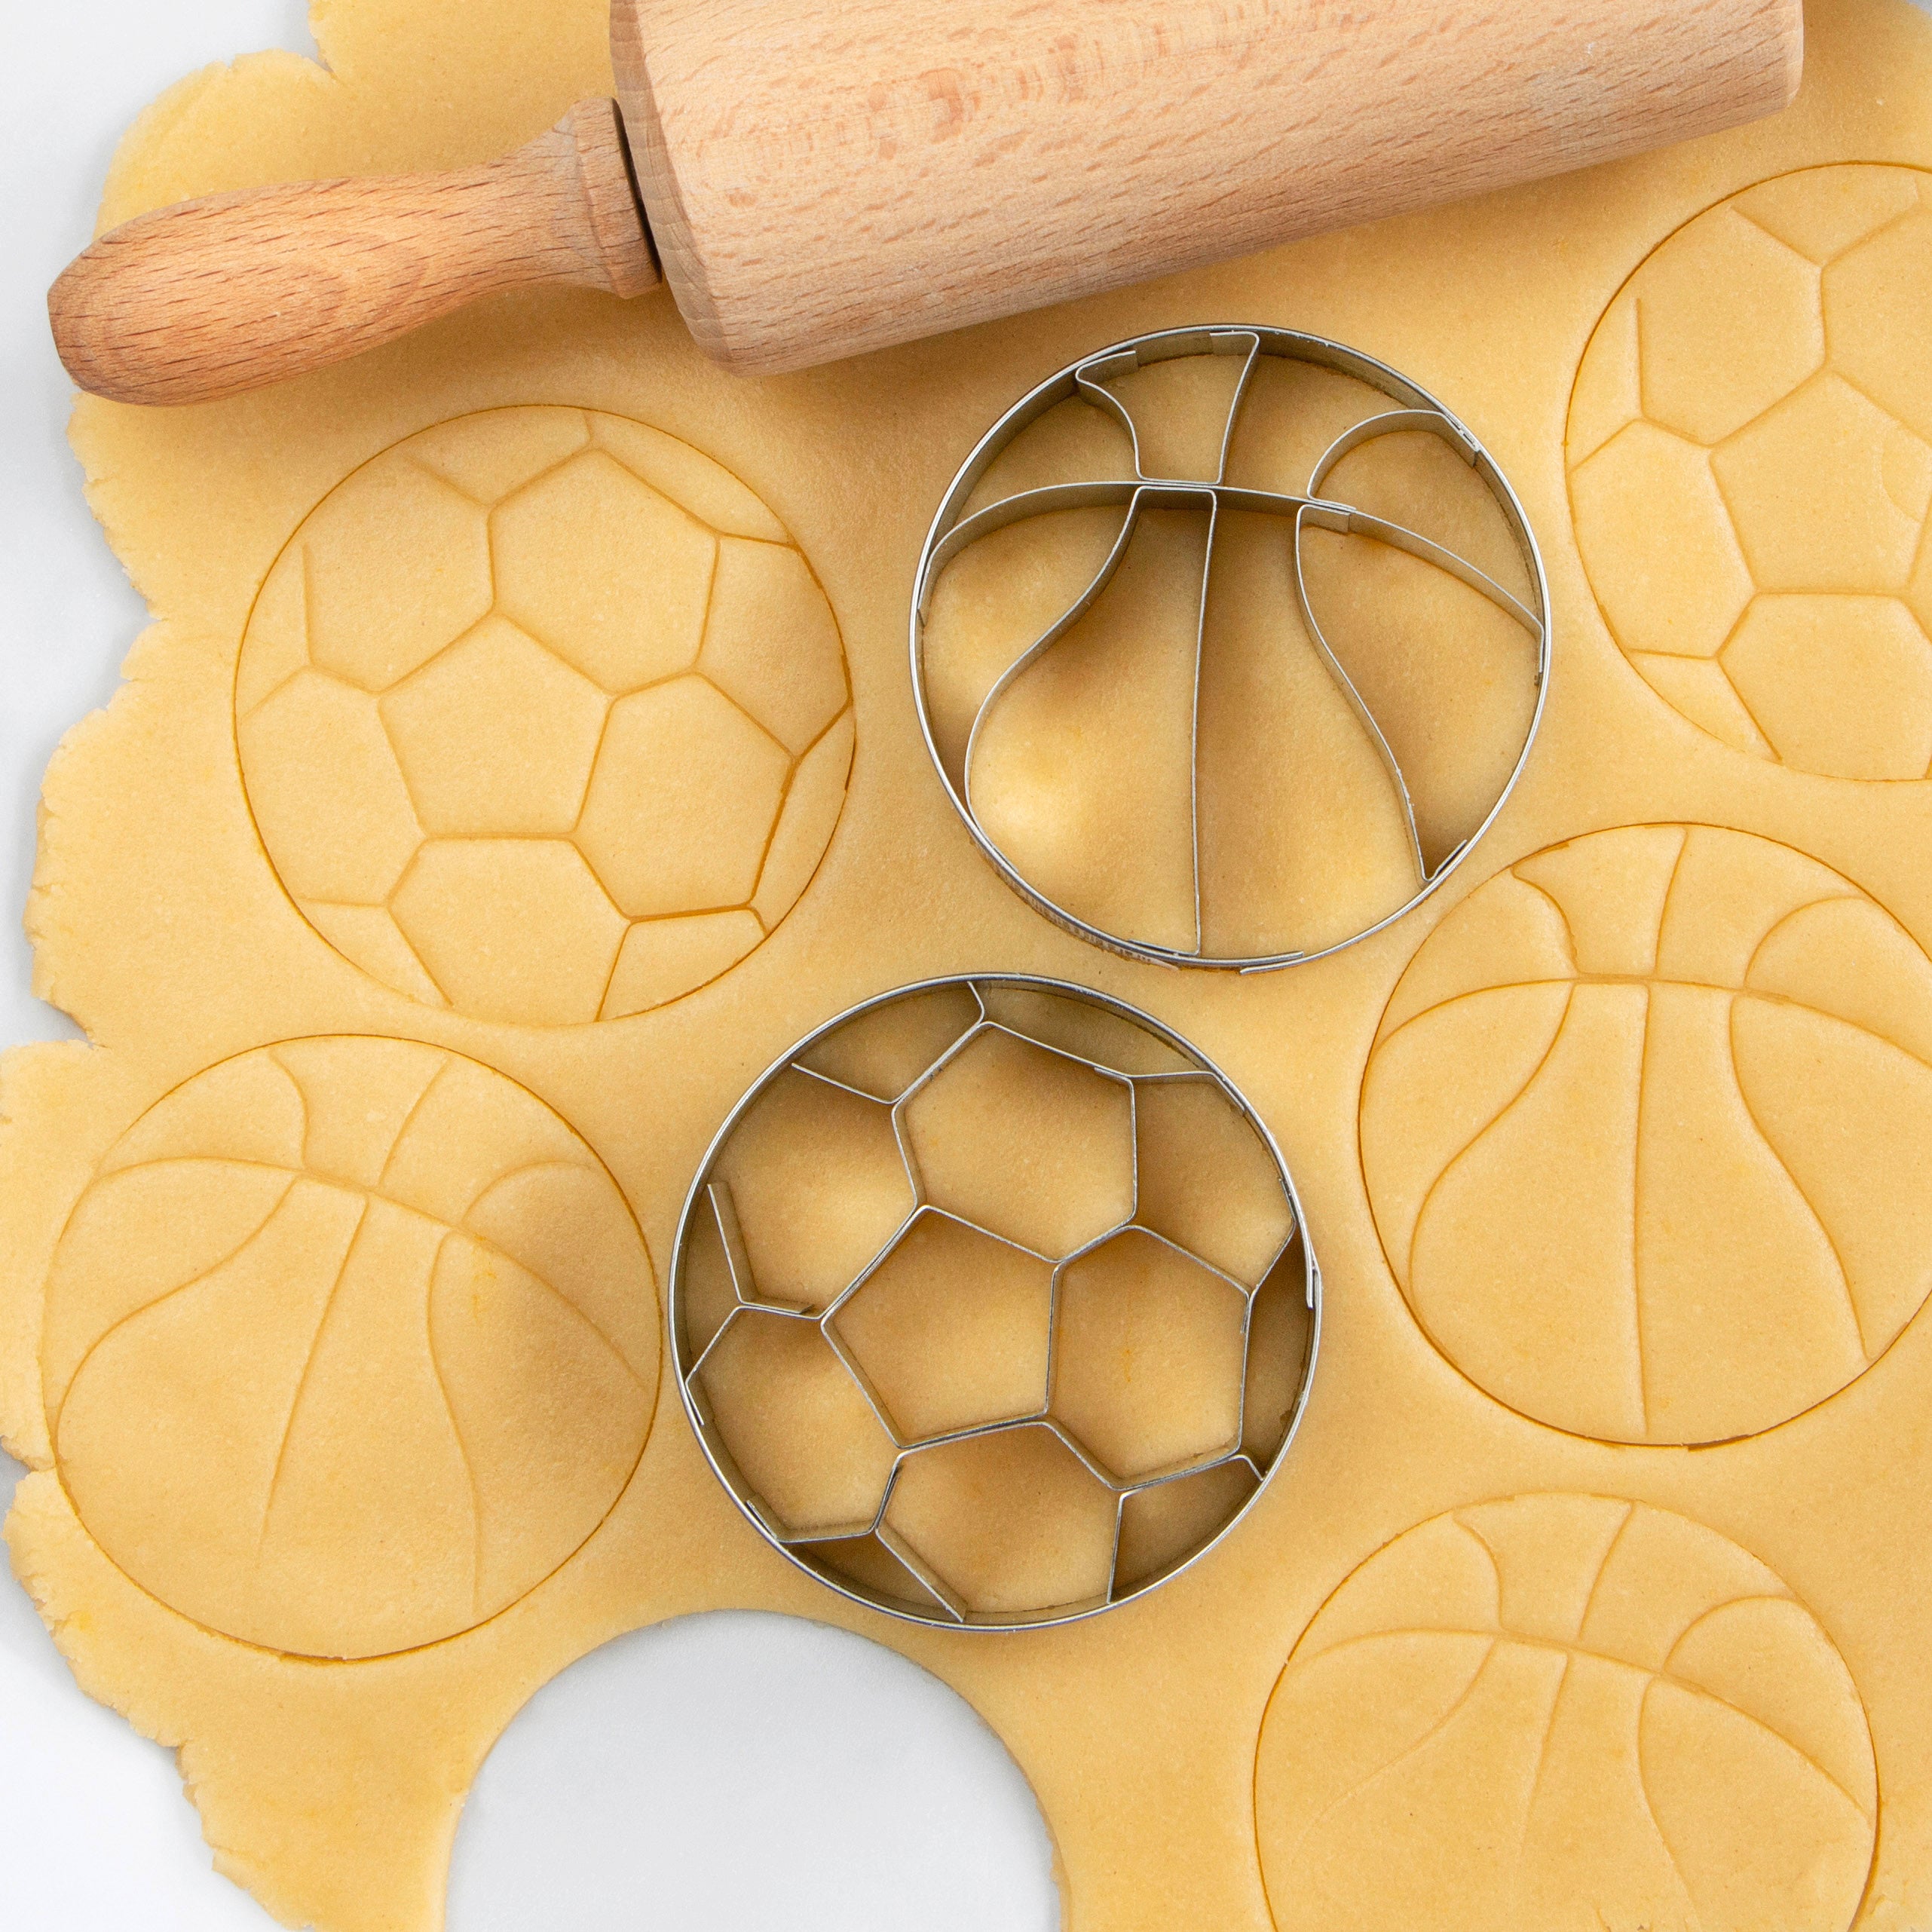 STÄDTER Sports embossing cookie cutter